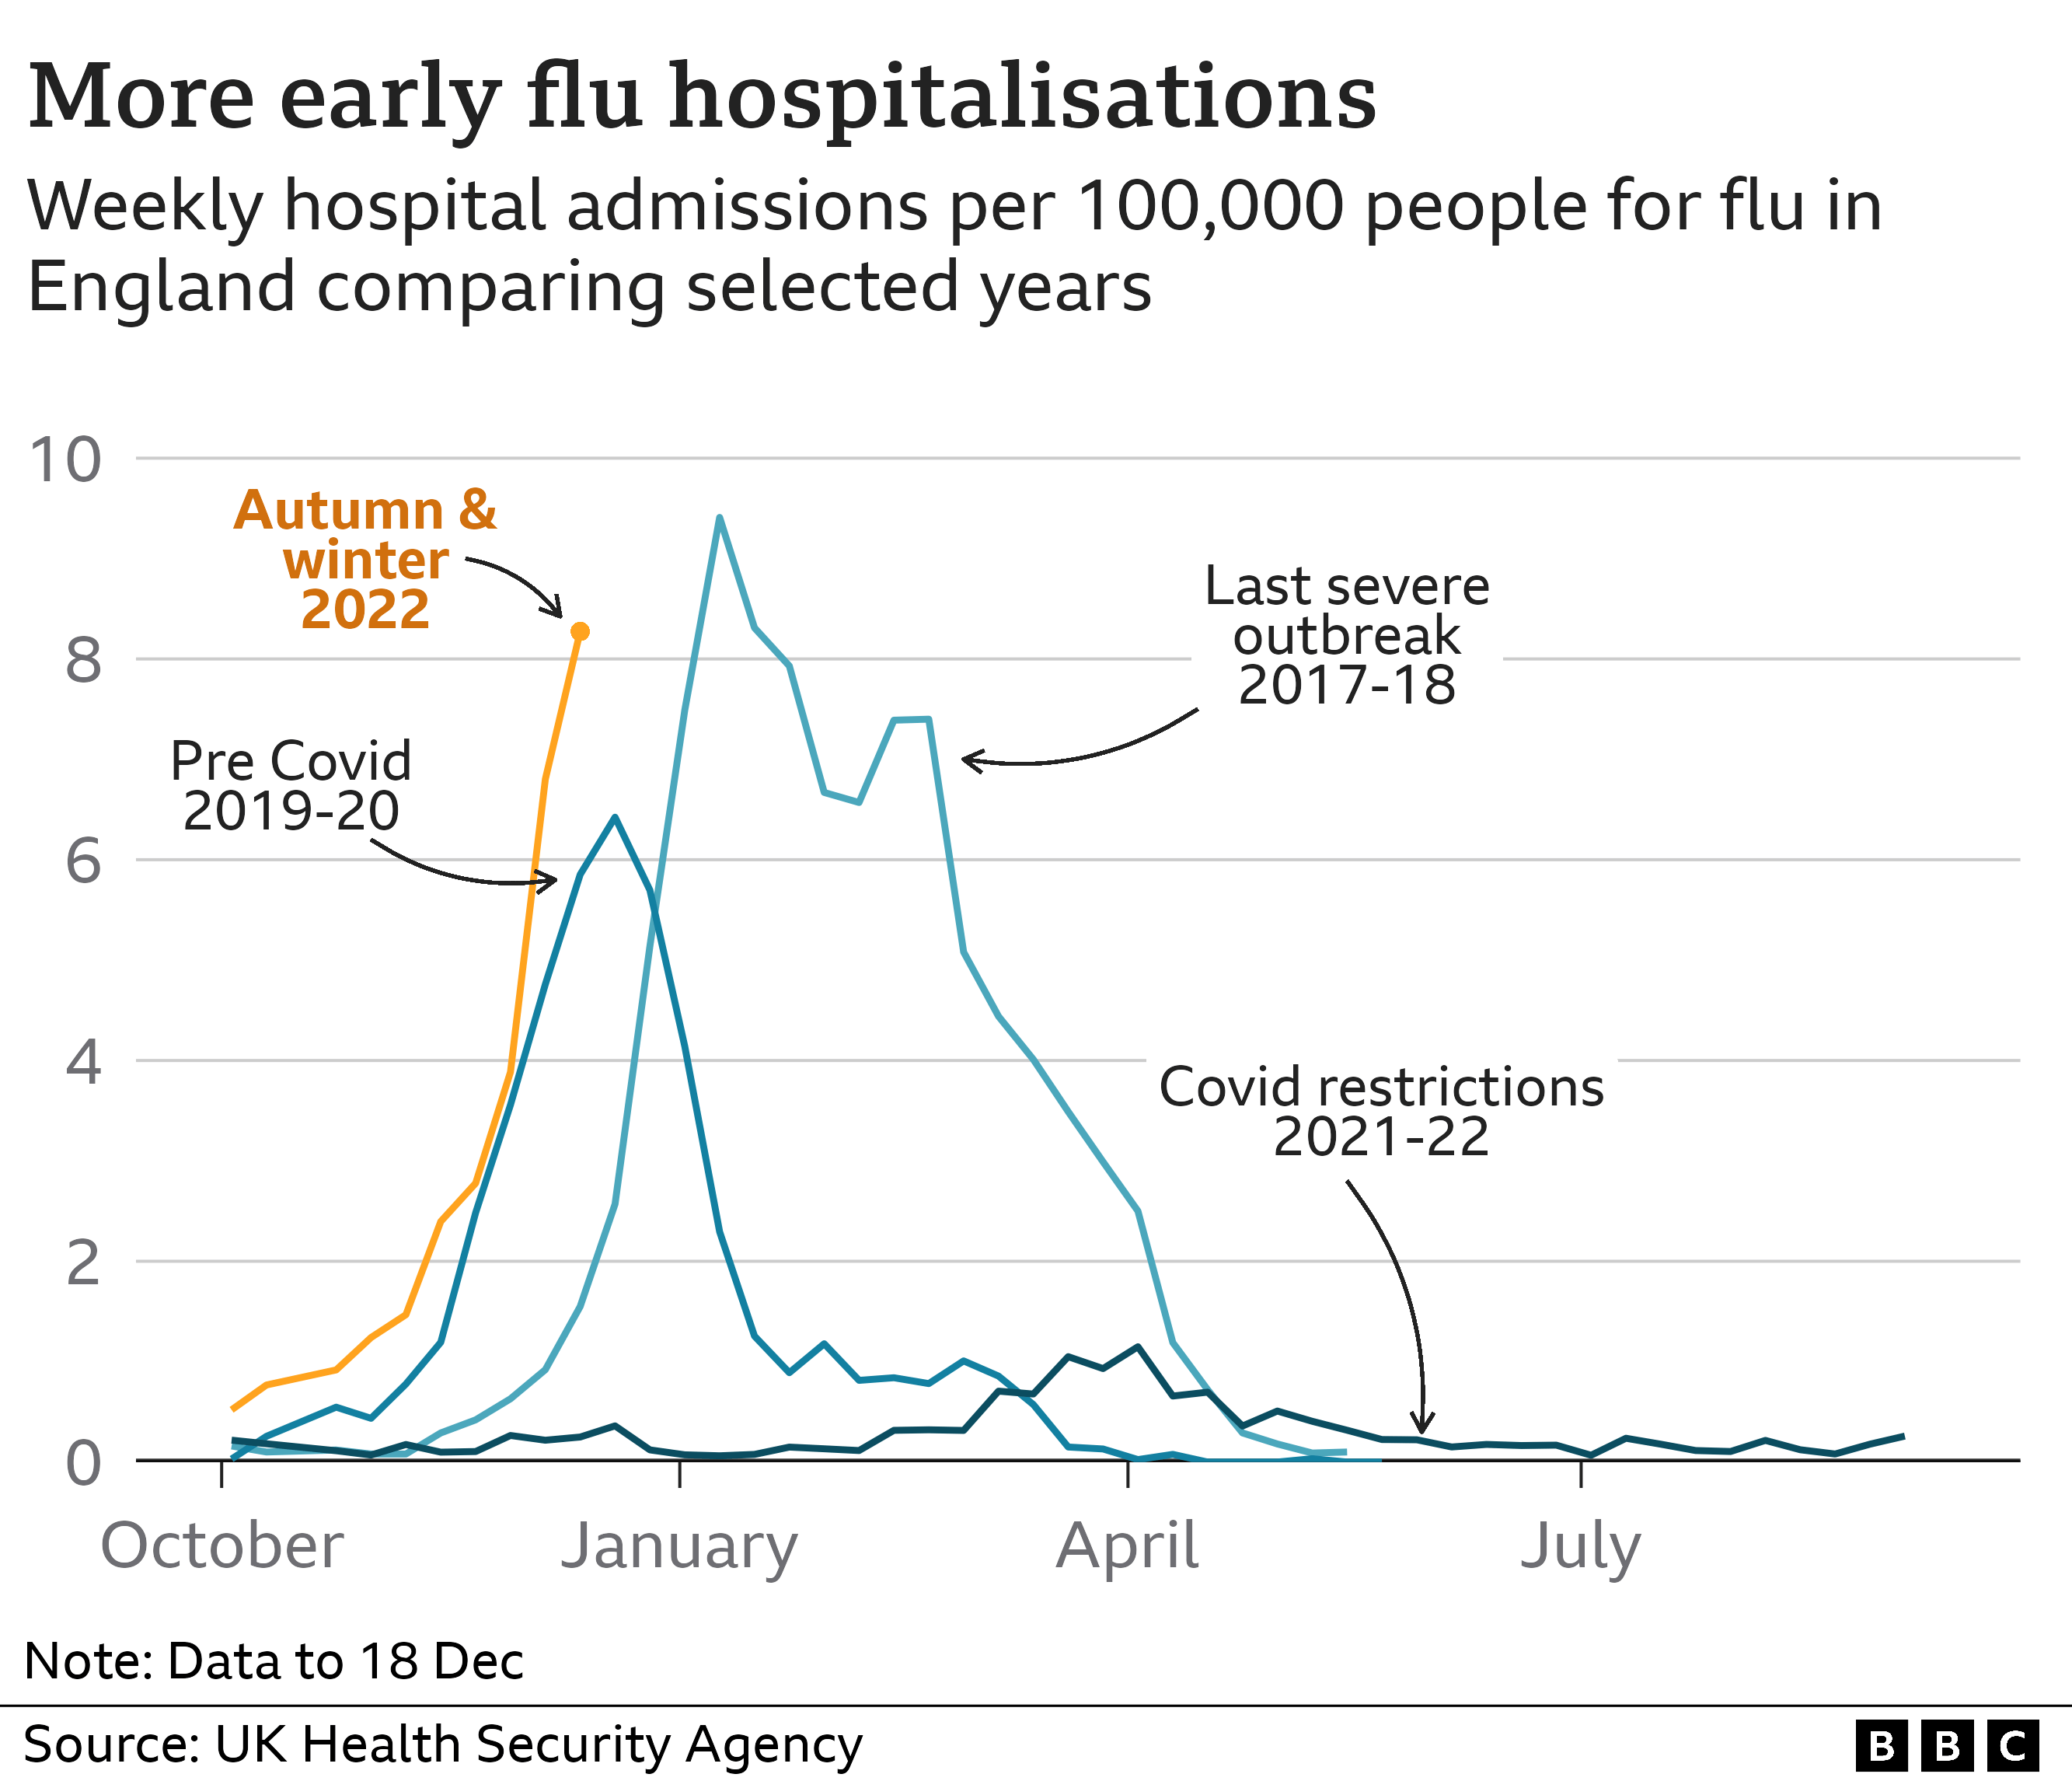 Chart showing the early impact of flu on hospitalisations in autumn 2022, with the rate above previous years. The chart showing how low levels of flu were in years where there were covid restricitions, but that the flu season this year has had an early impact and is above levels recorded in 2019-2020, but at the moment below the previous severe outbreak of 2017-18.